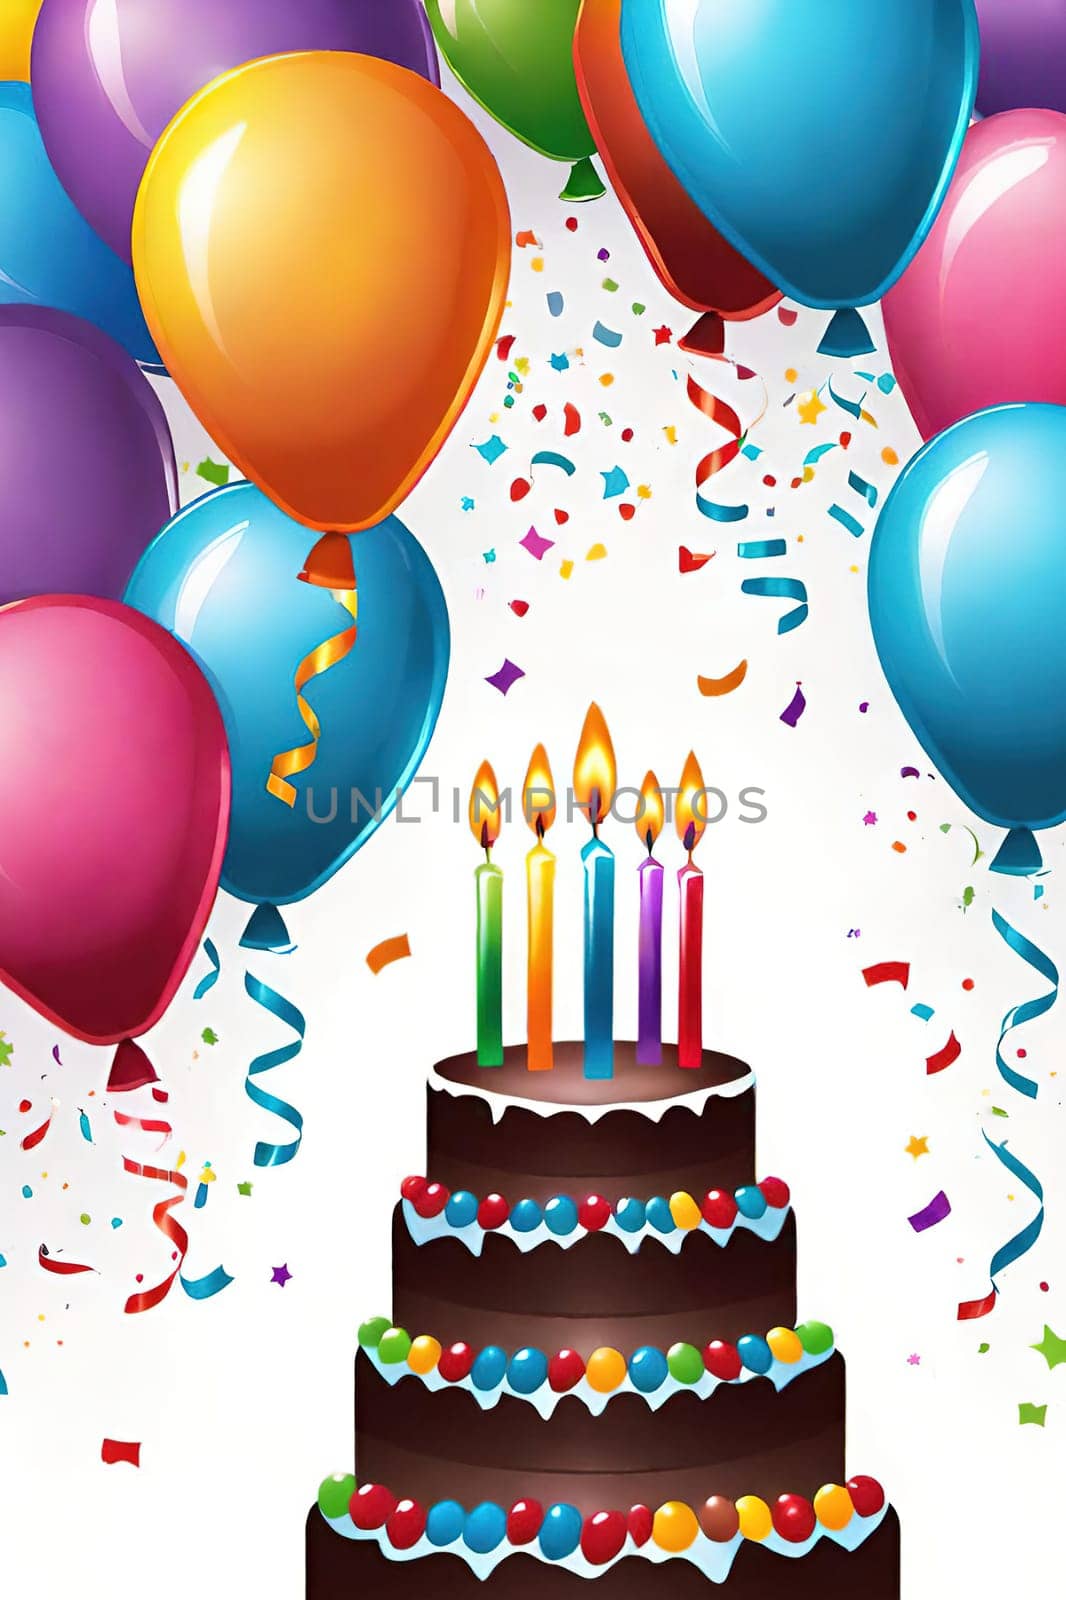 birthday card with cake and balloons on background. vector illustration.Birthday cake with candles, balloons and confetti. Birthday card with cake, balloons, confetti and ribbons. Birthday concept.